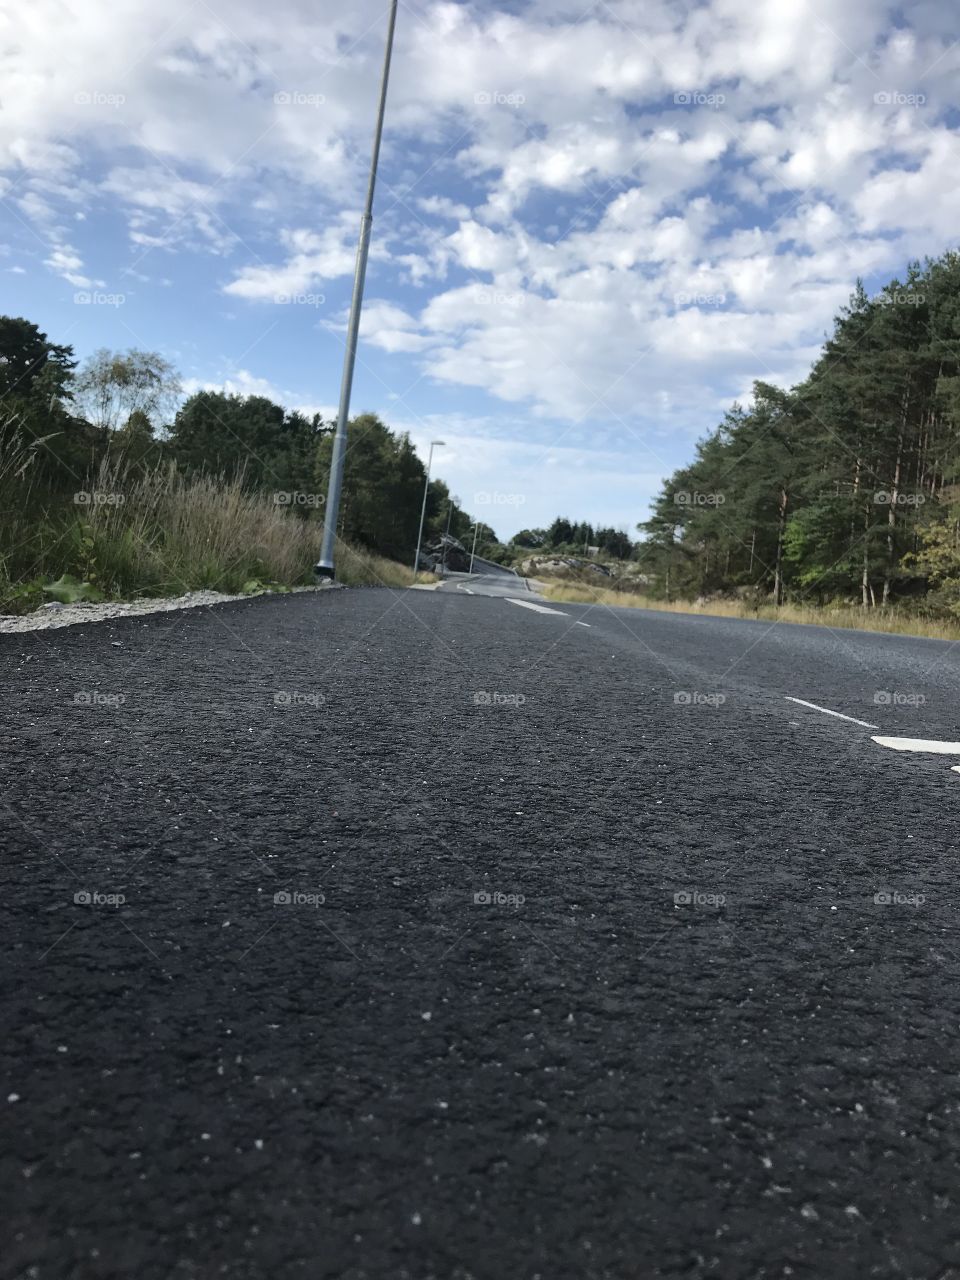 A road in Norway. On the day the picture was taken it was warm weather and blue skies.